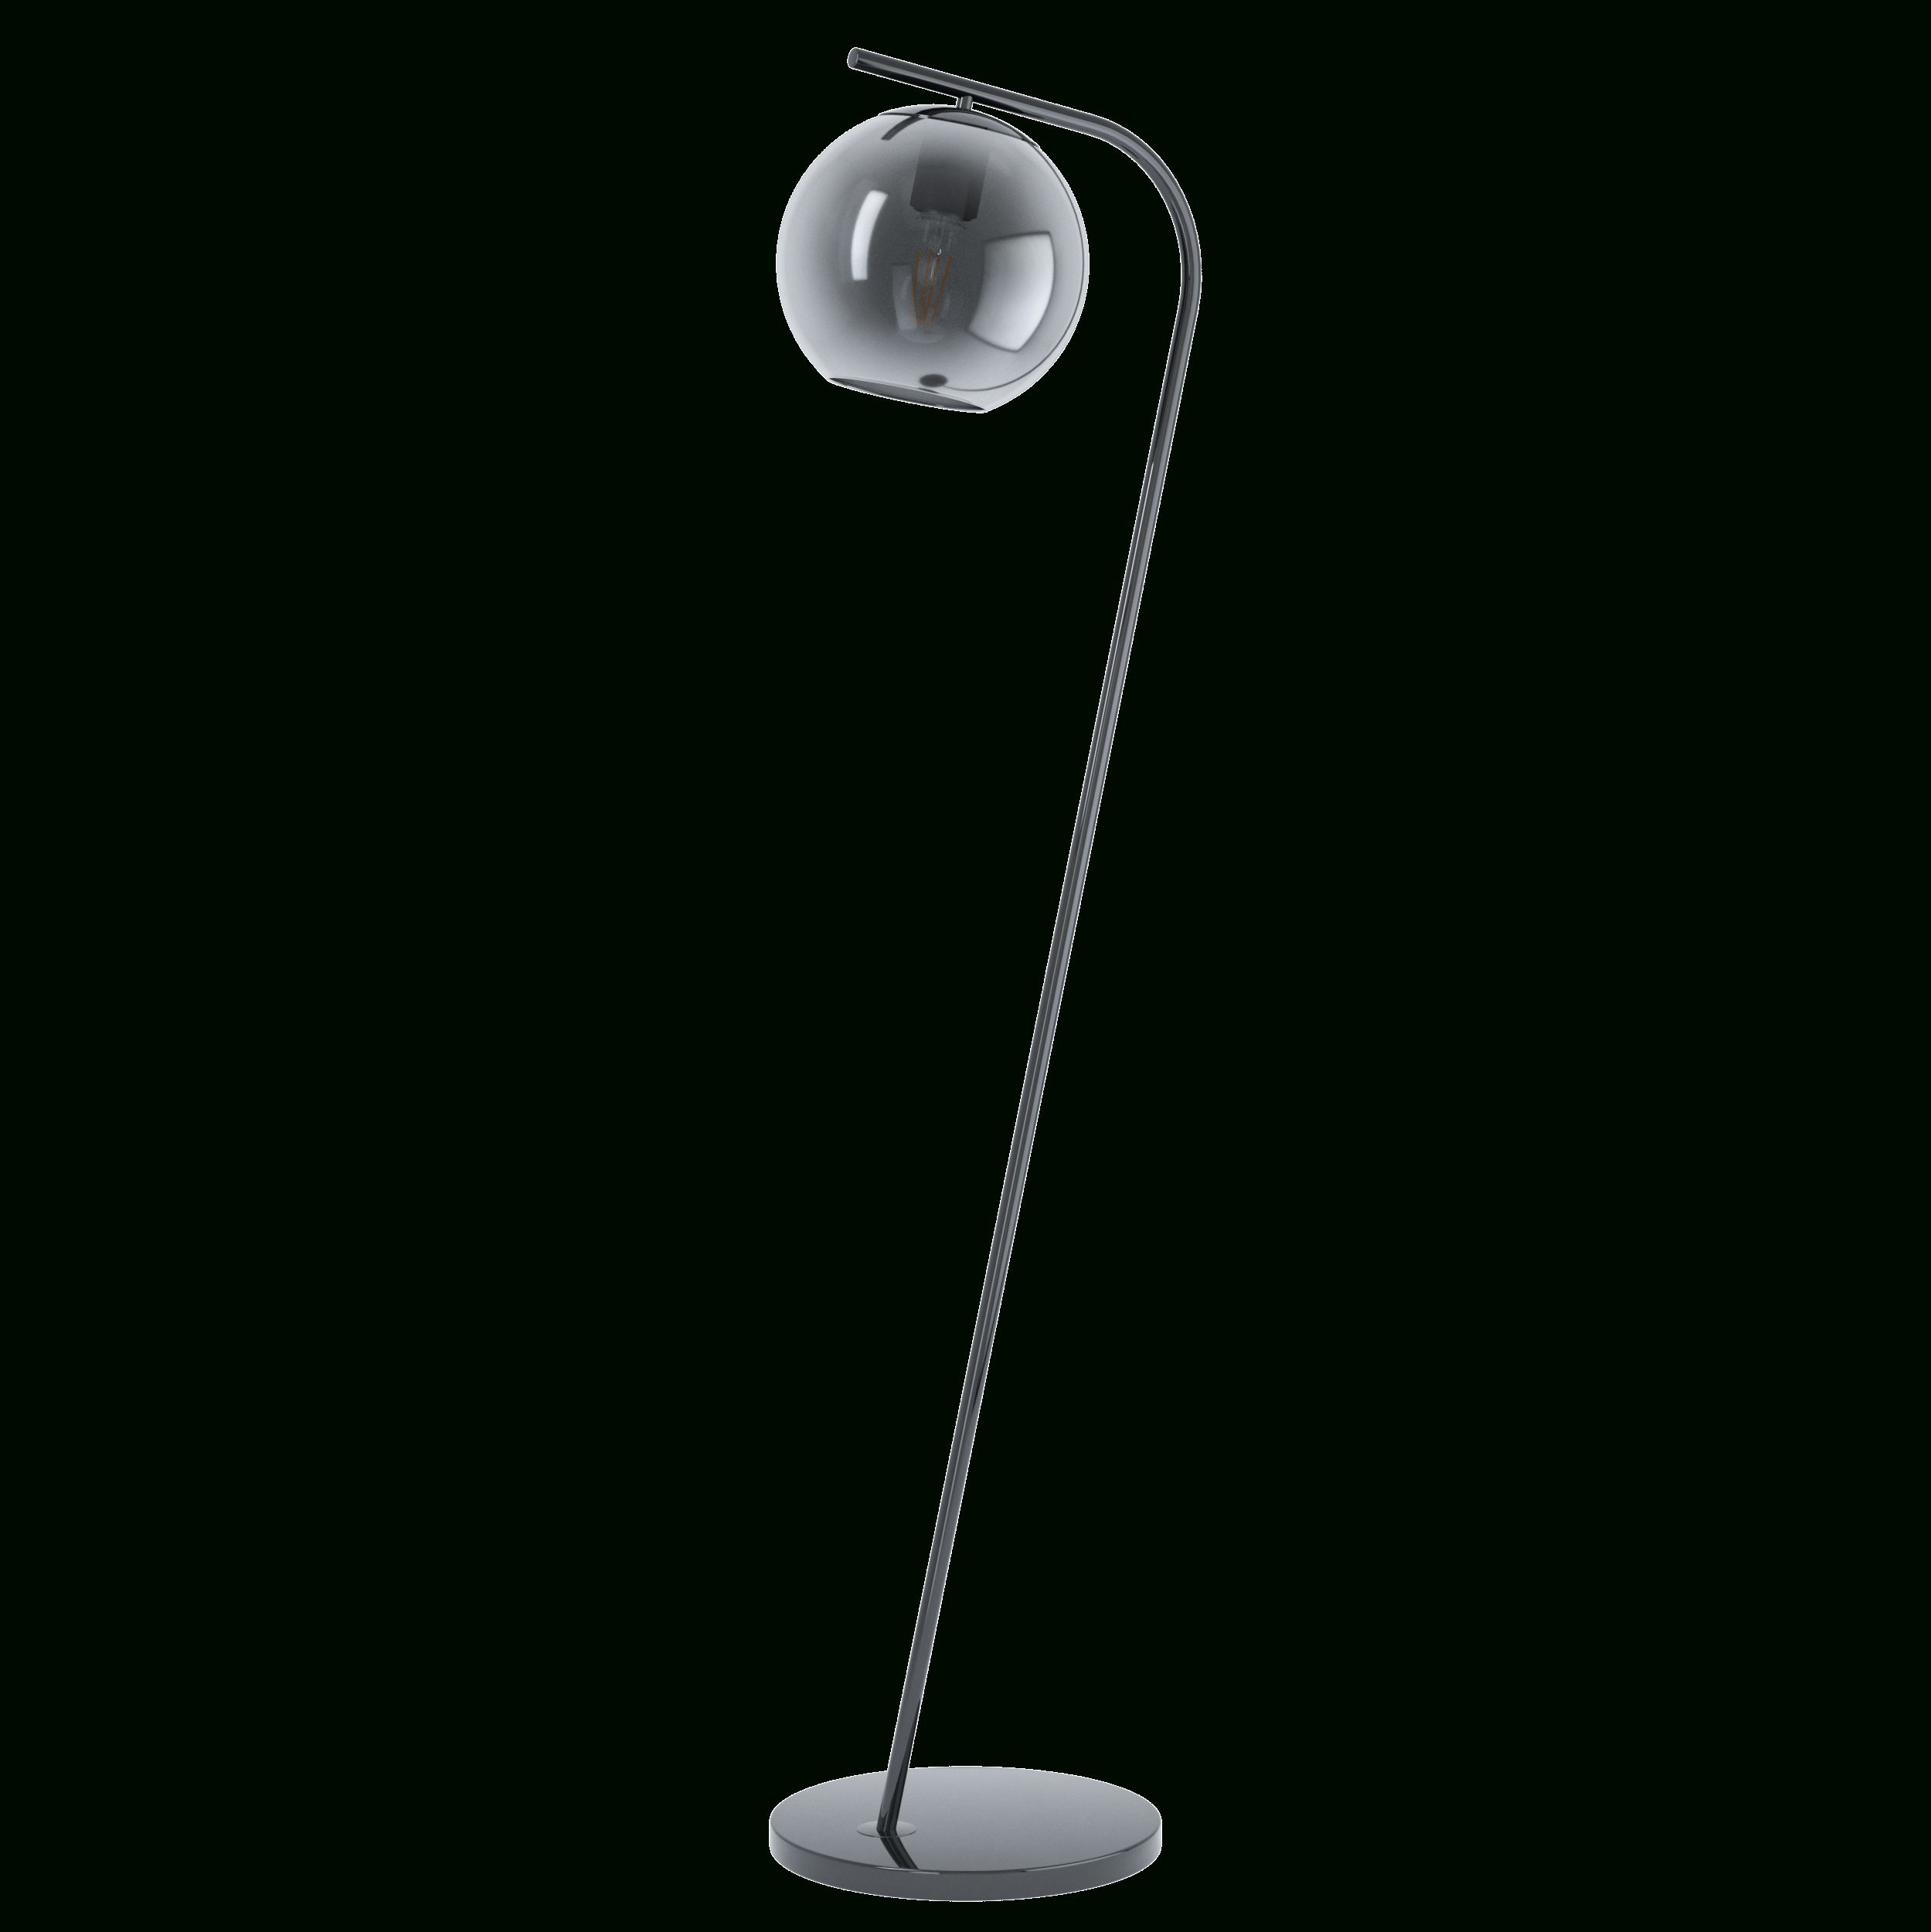 Terriente Black Smoke Glass Floor Lamp – Led Lighting Designs Pertaining To Most Current Smoke Glass Floor Lamps (View 4 of 15)